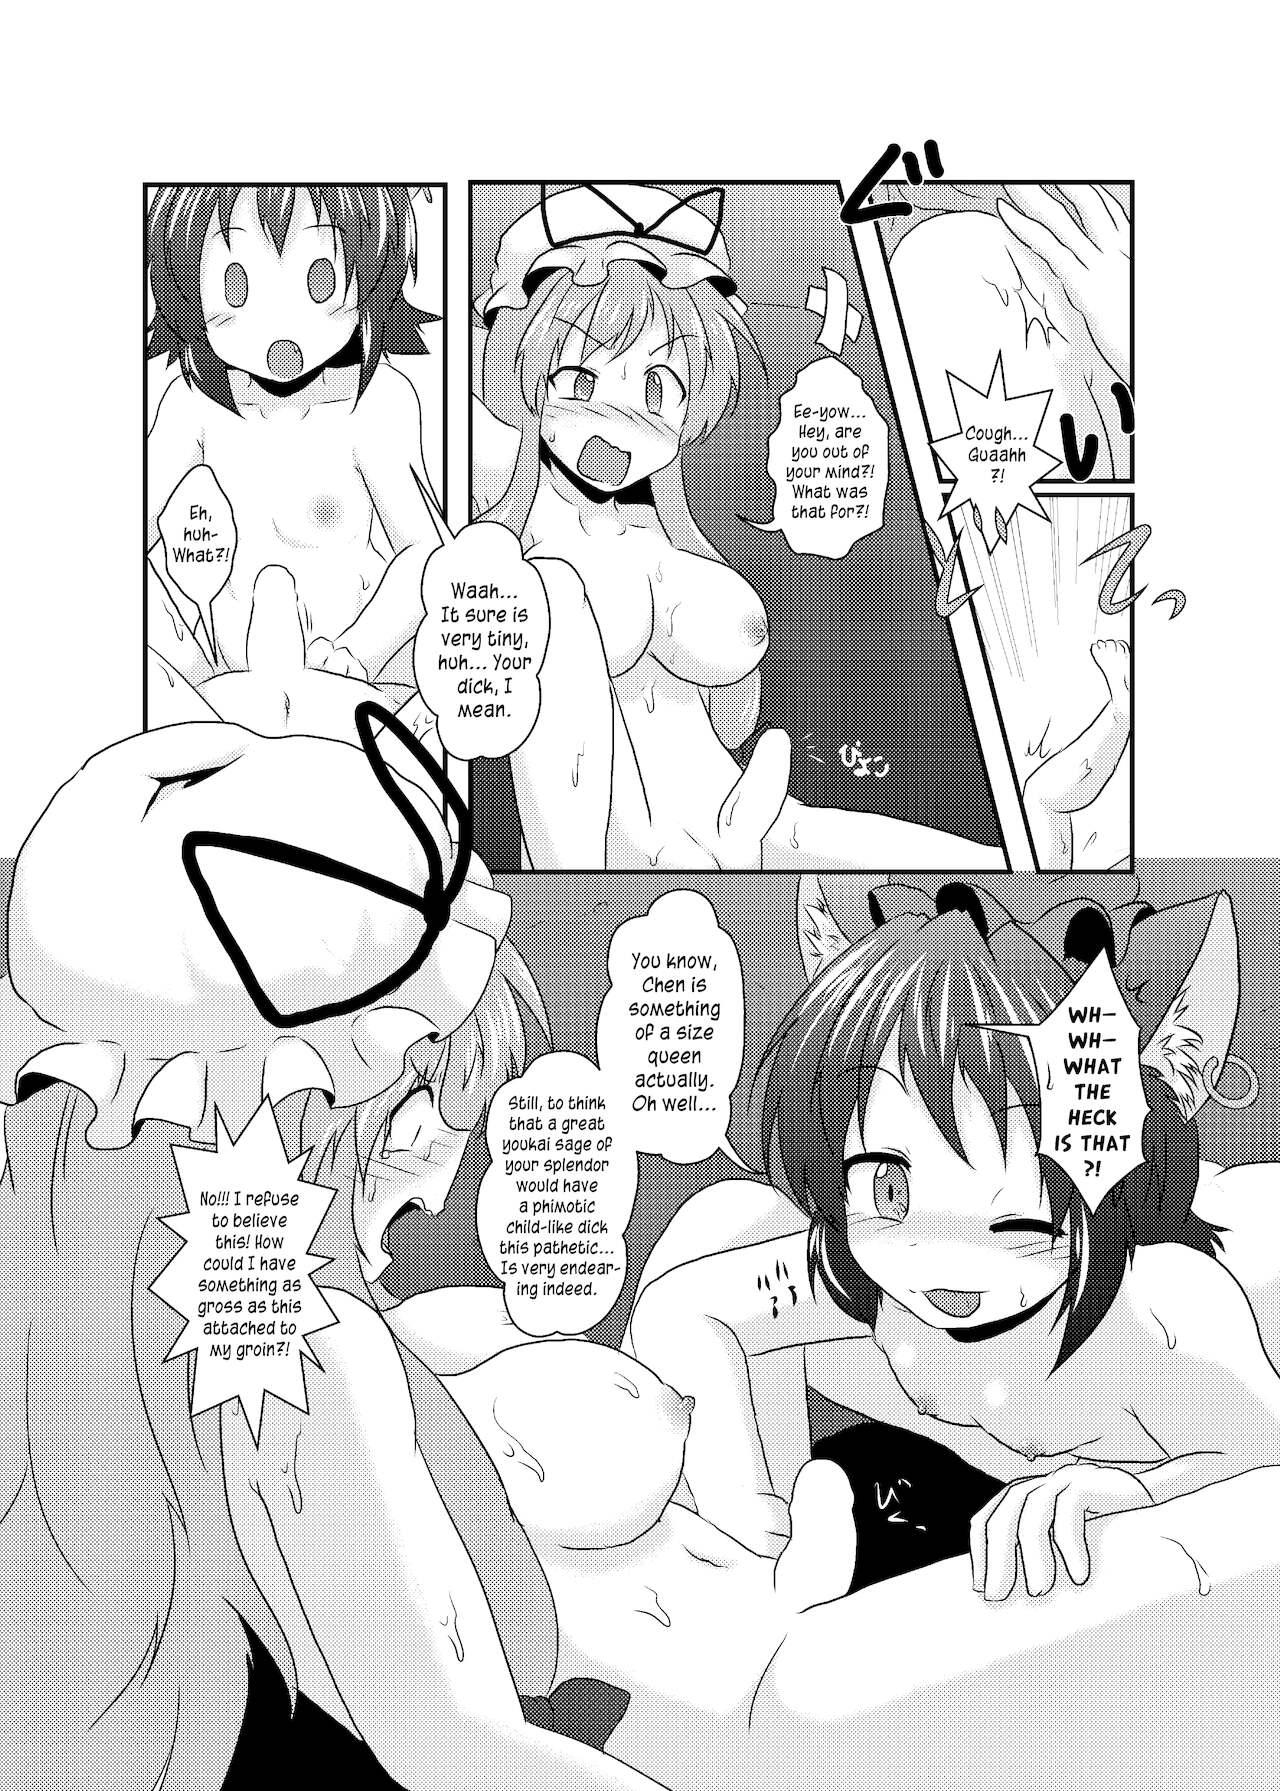 Curves Chotto Tsukarechatta Mitai | I think I'm a little possessed! - Touhou project HD - Page 10